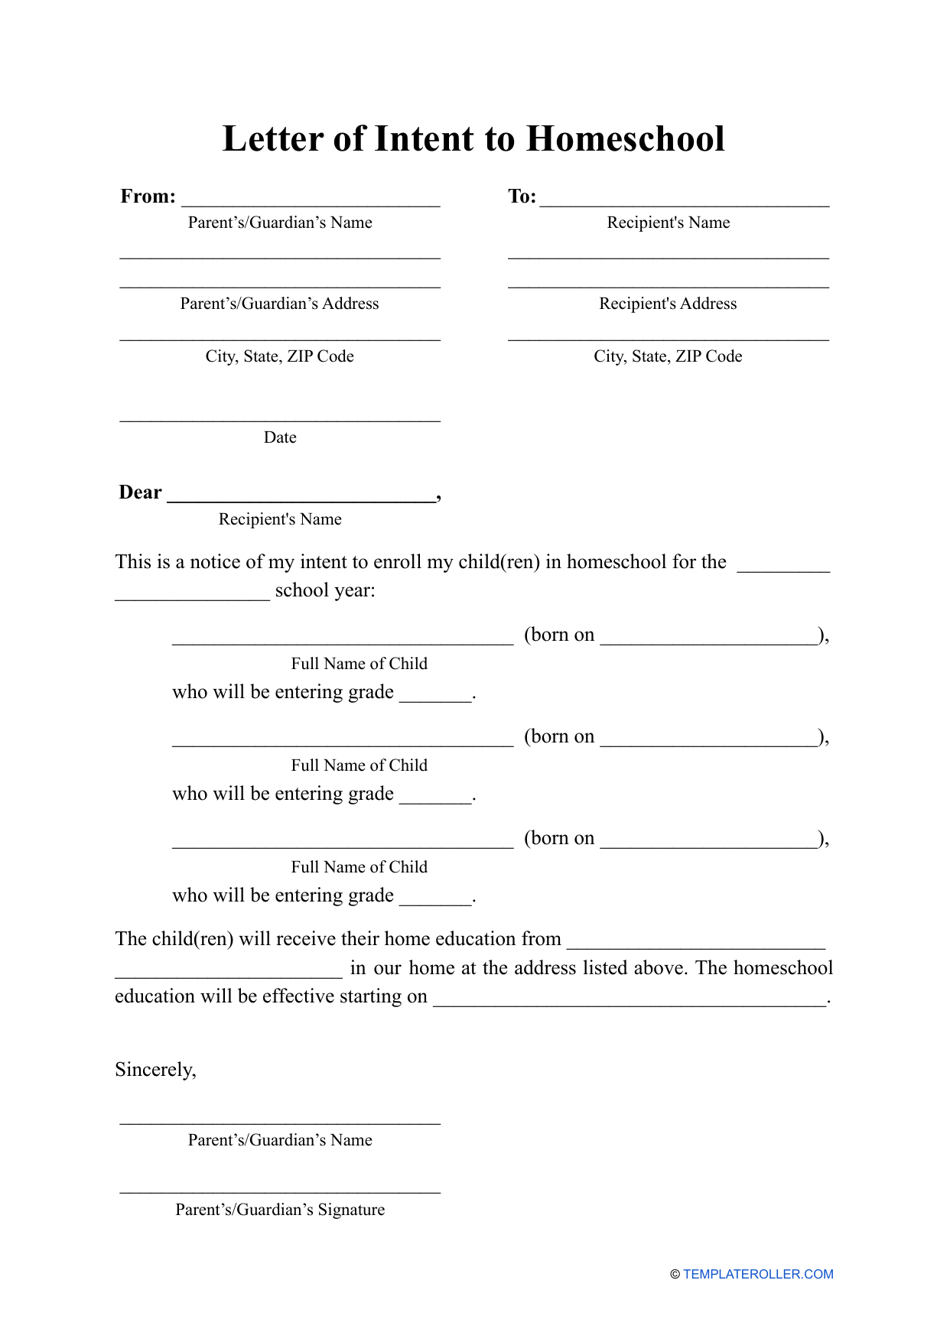 letter-of-intent-to-homeschool-template-download-printable-pdf-433